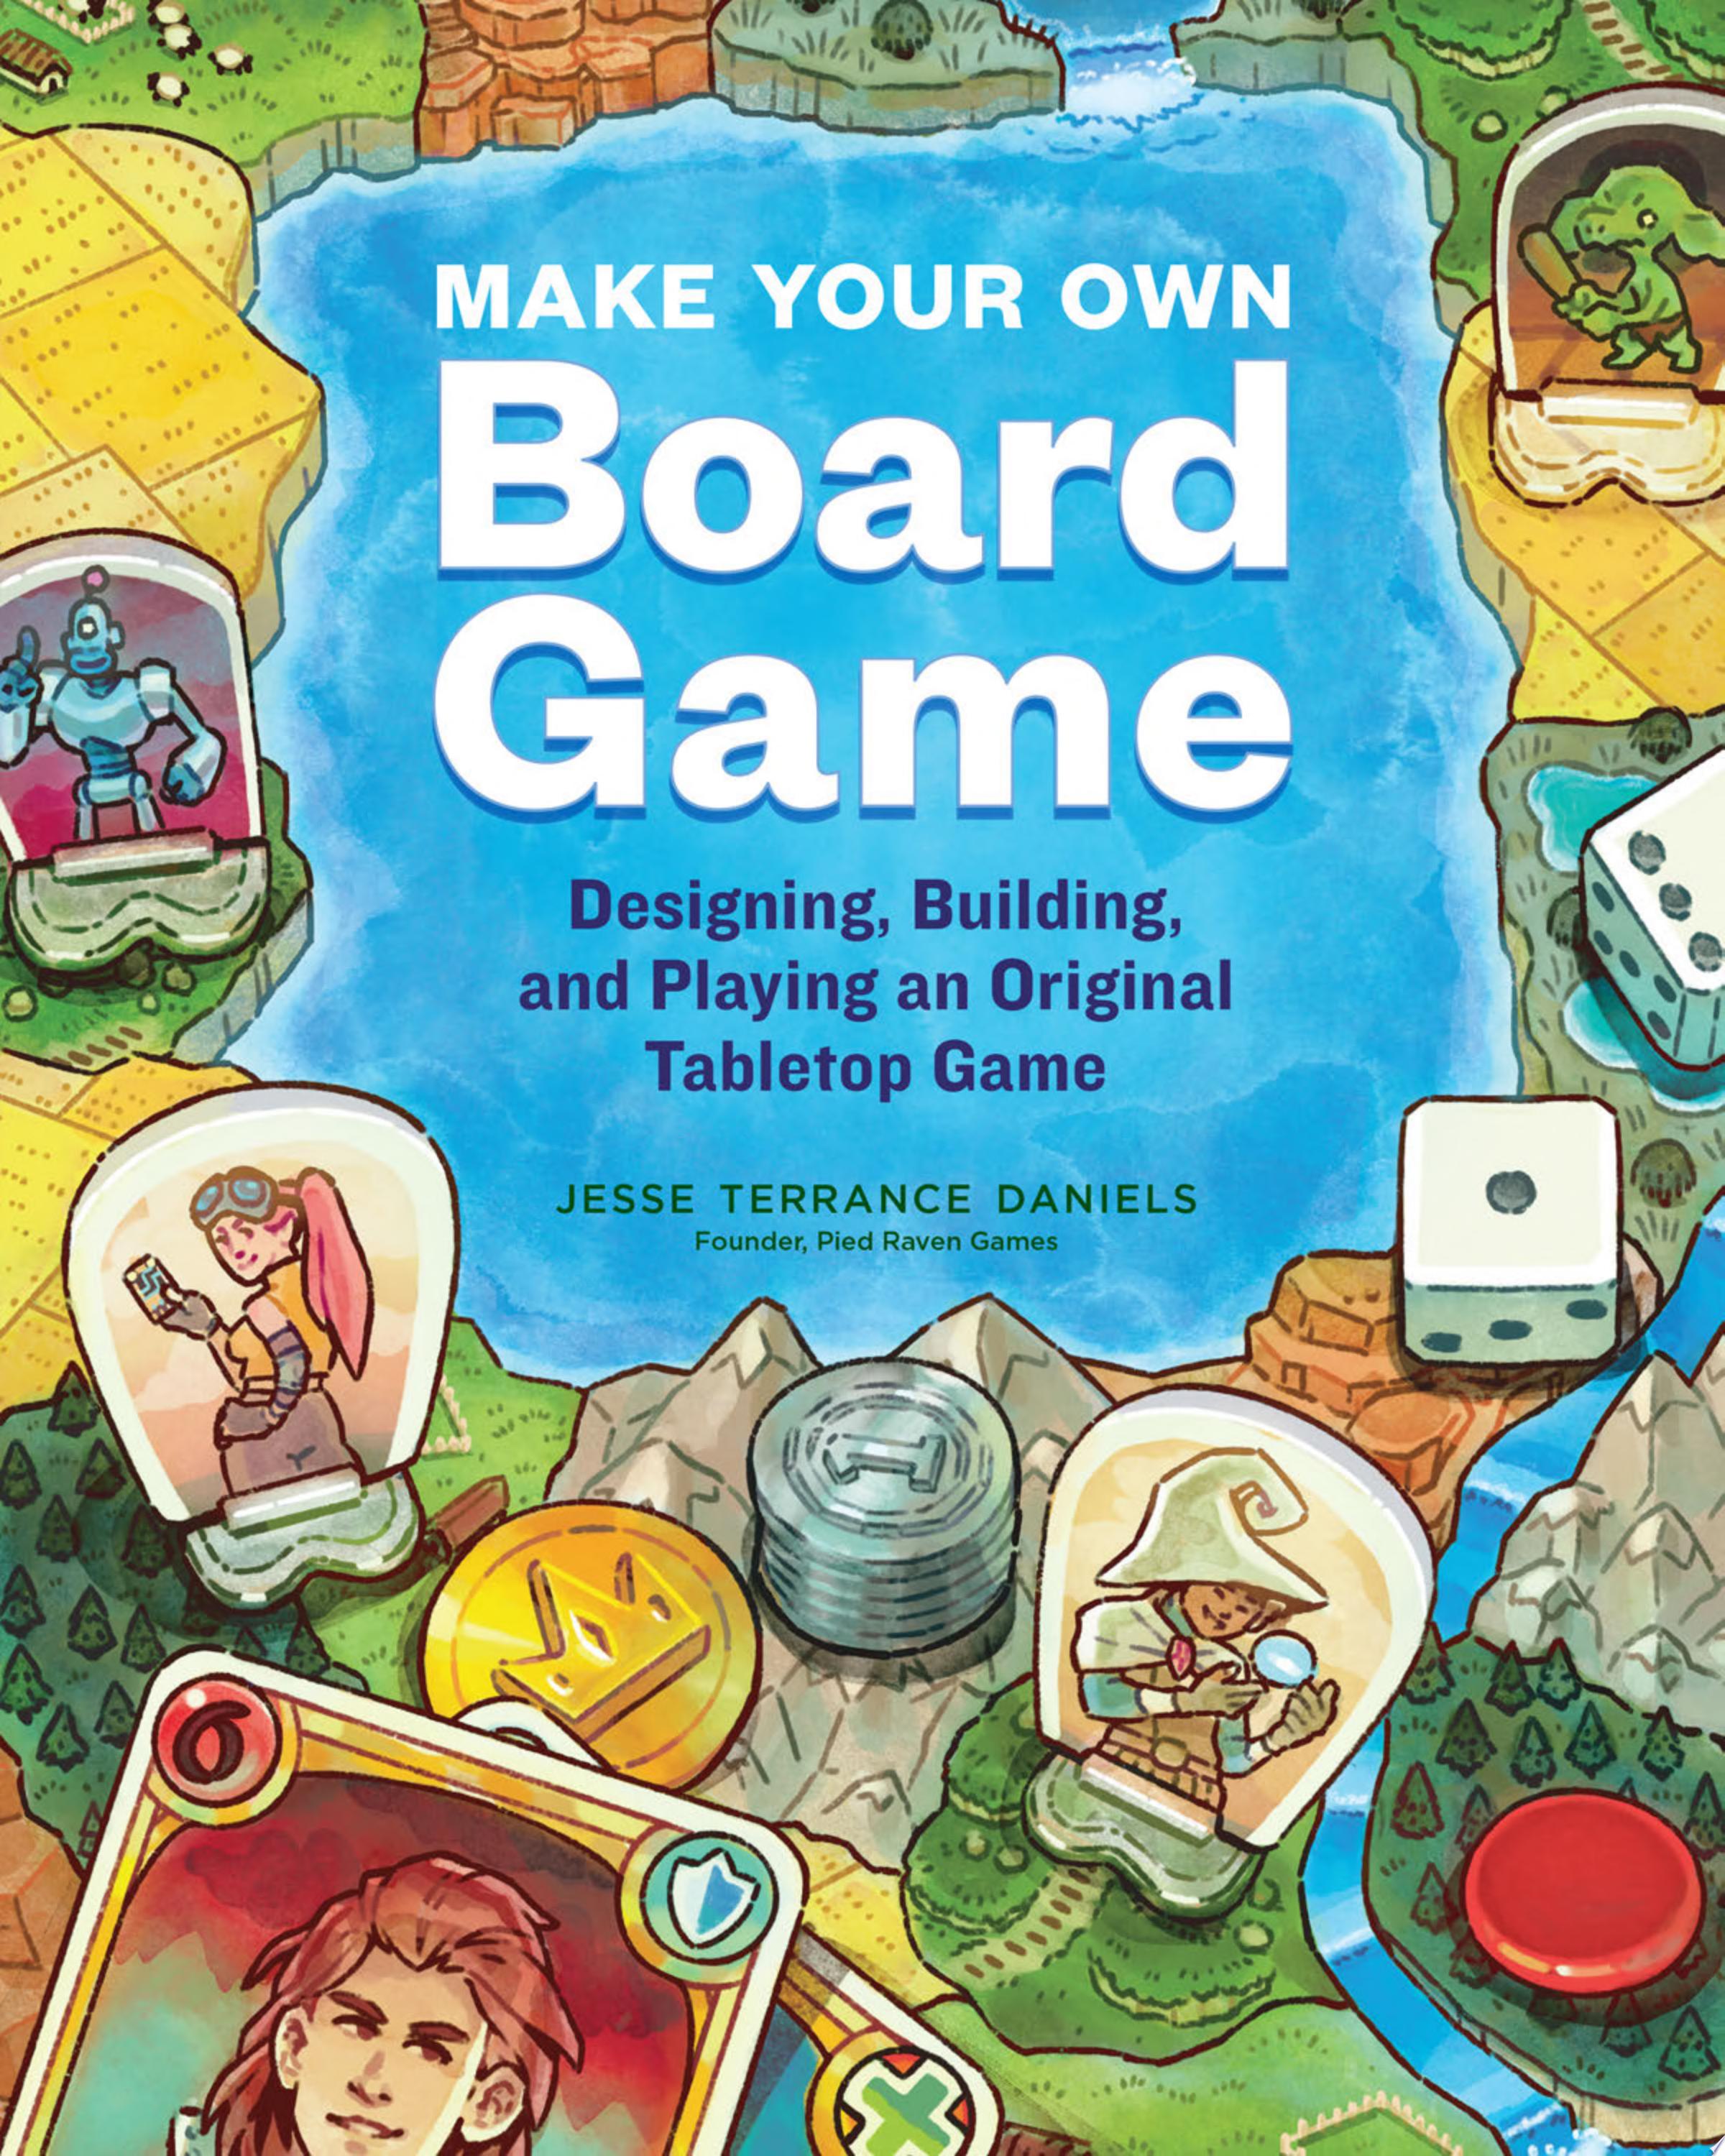 Image for "Make Your Own Board Game"